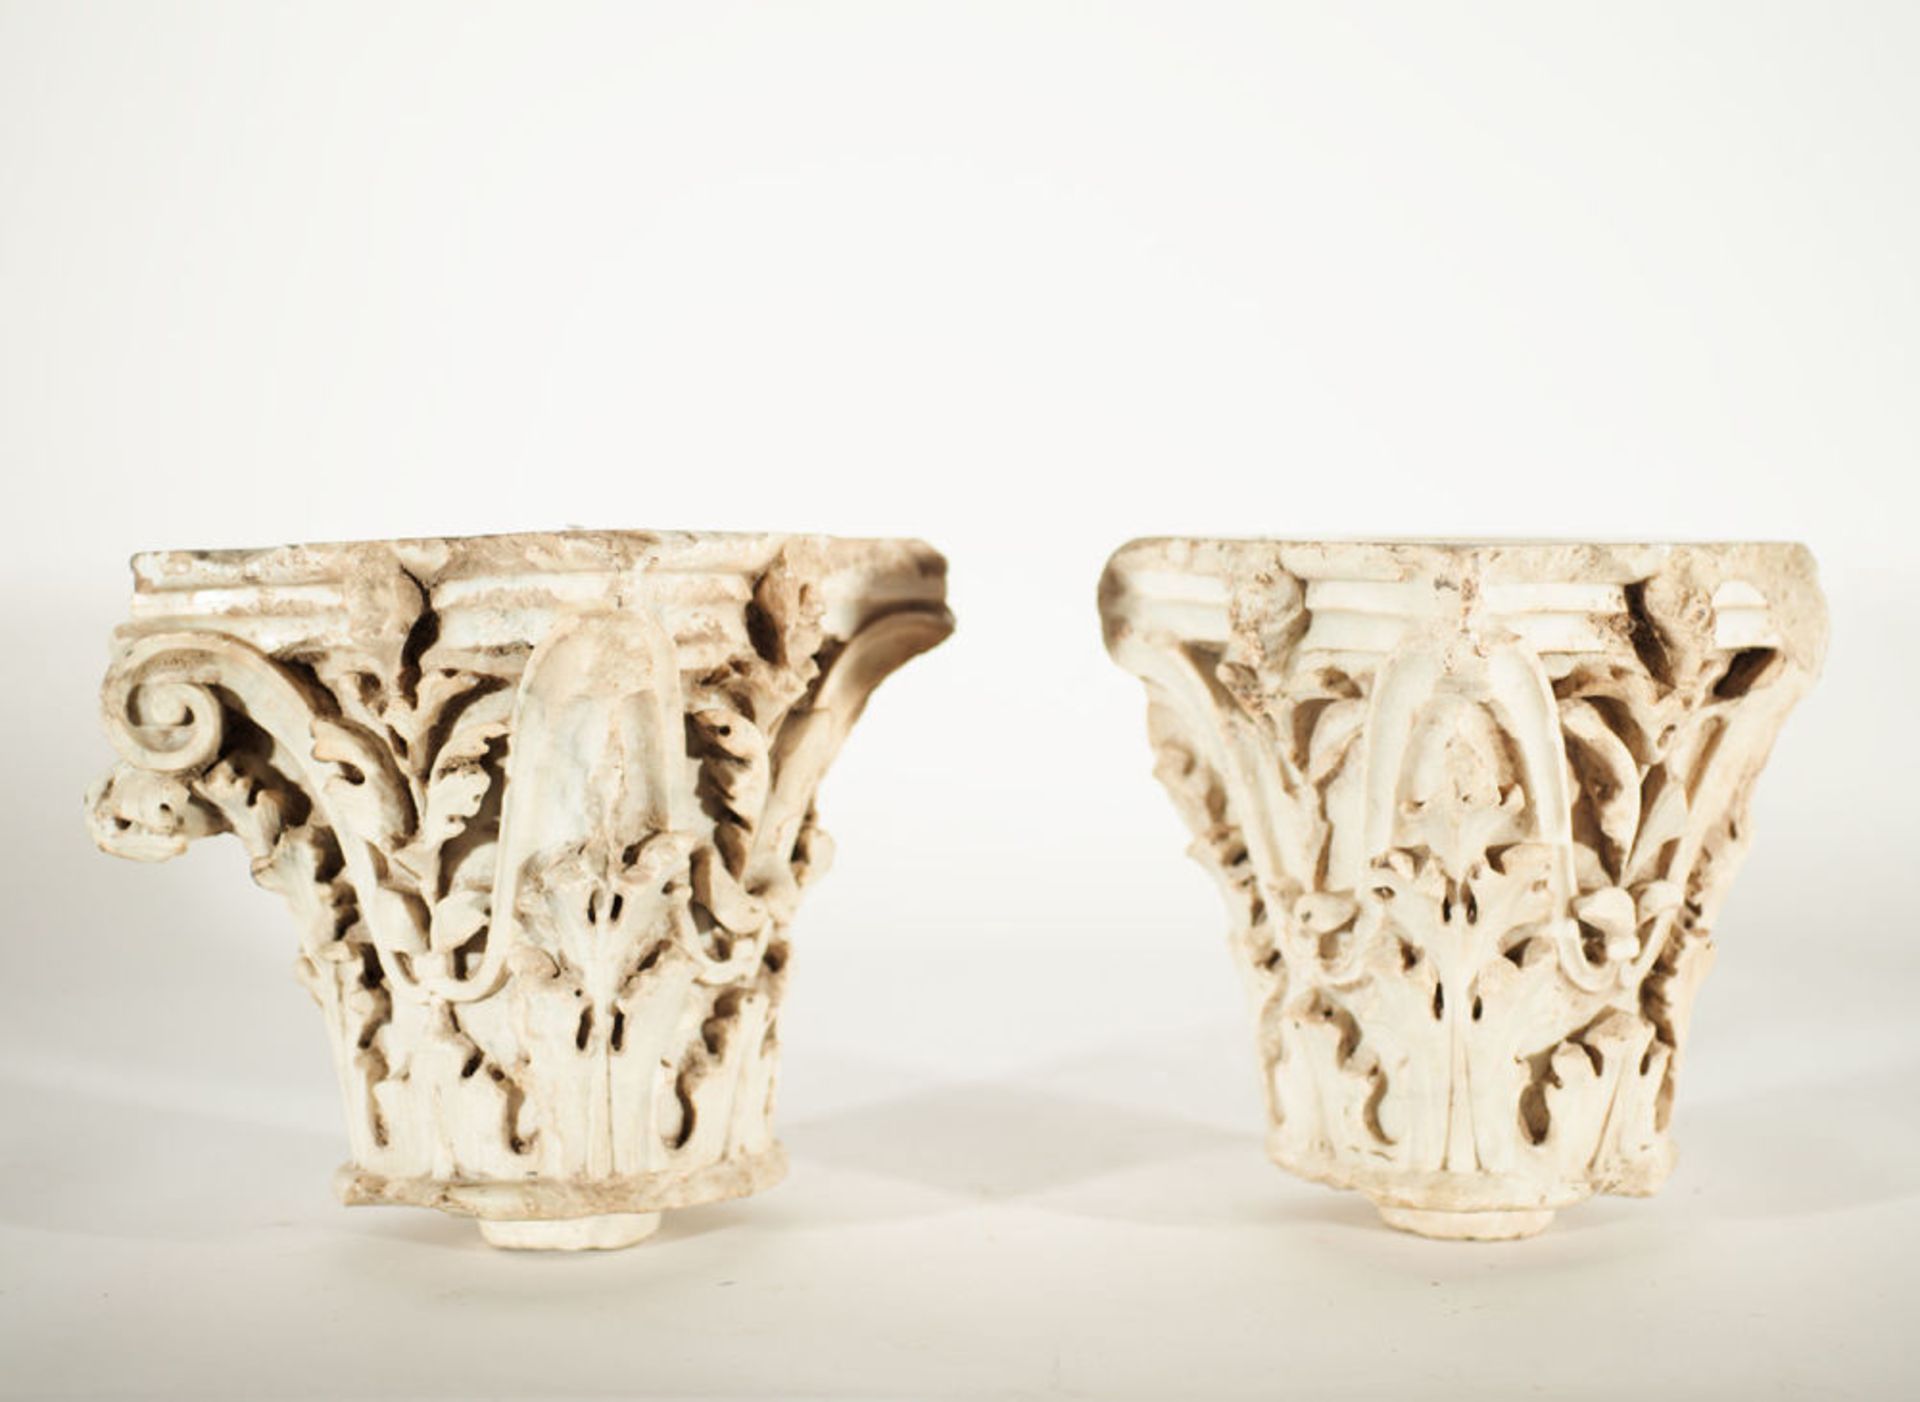 Magnificent Pair of Corinthian Capitals, possibly Roman Empire, Flavian period, 2nd - 3rd century AD